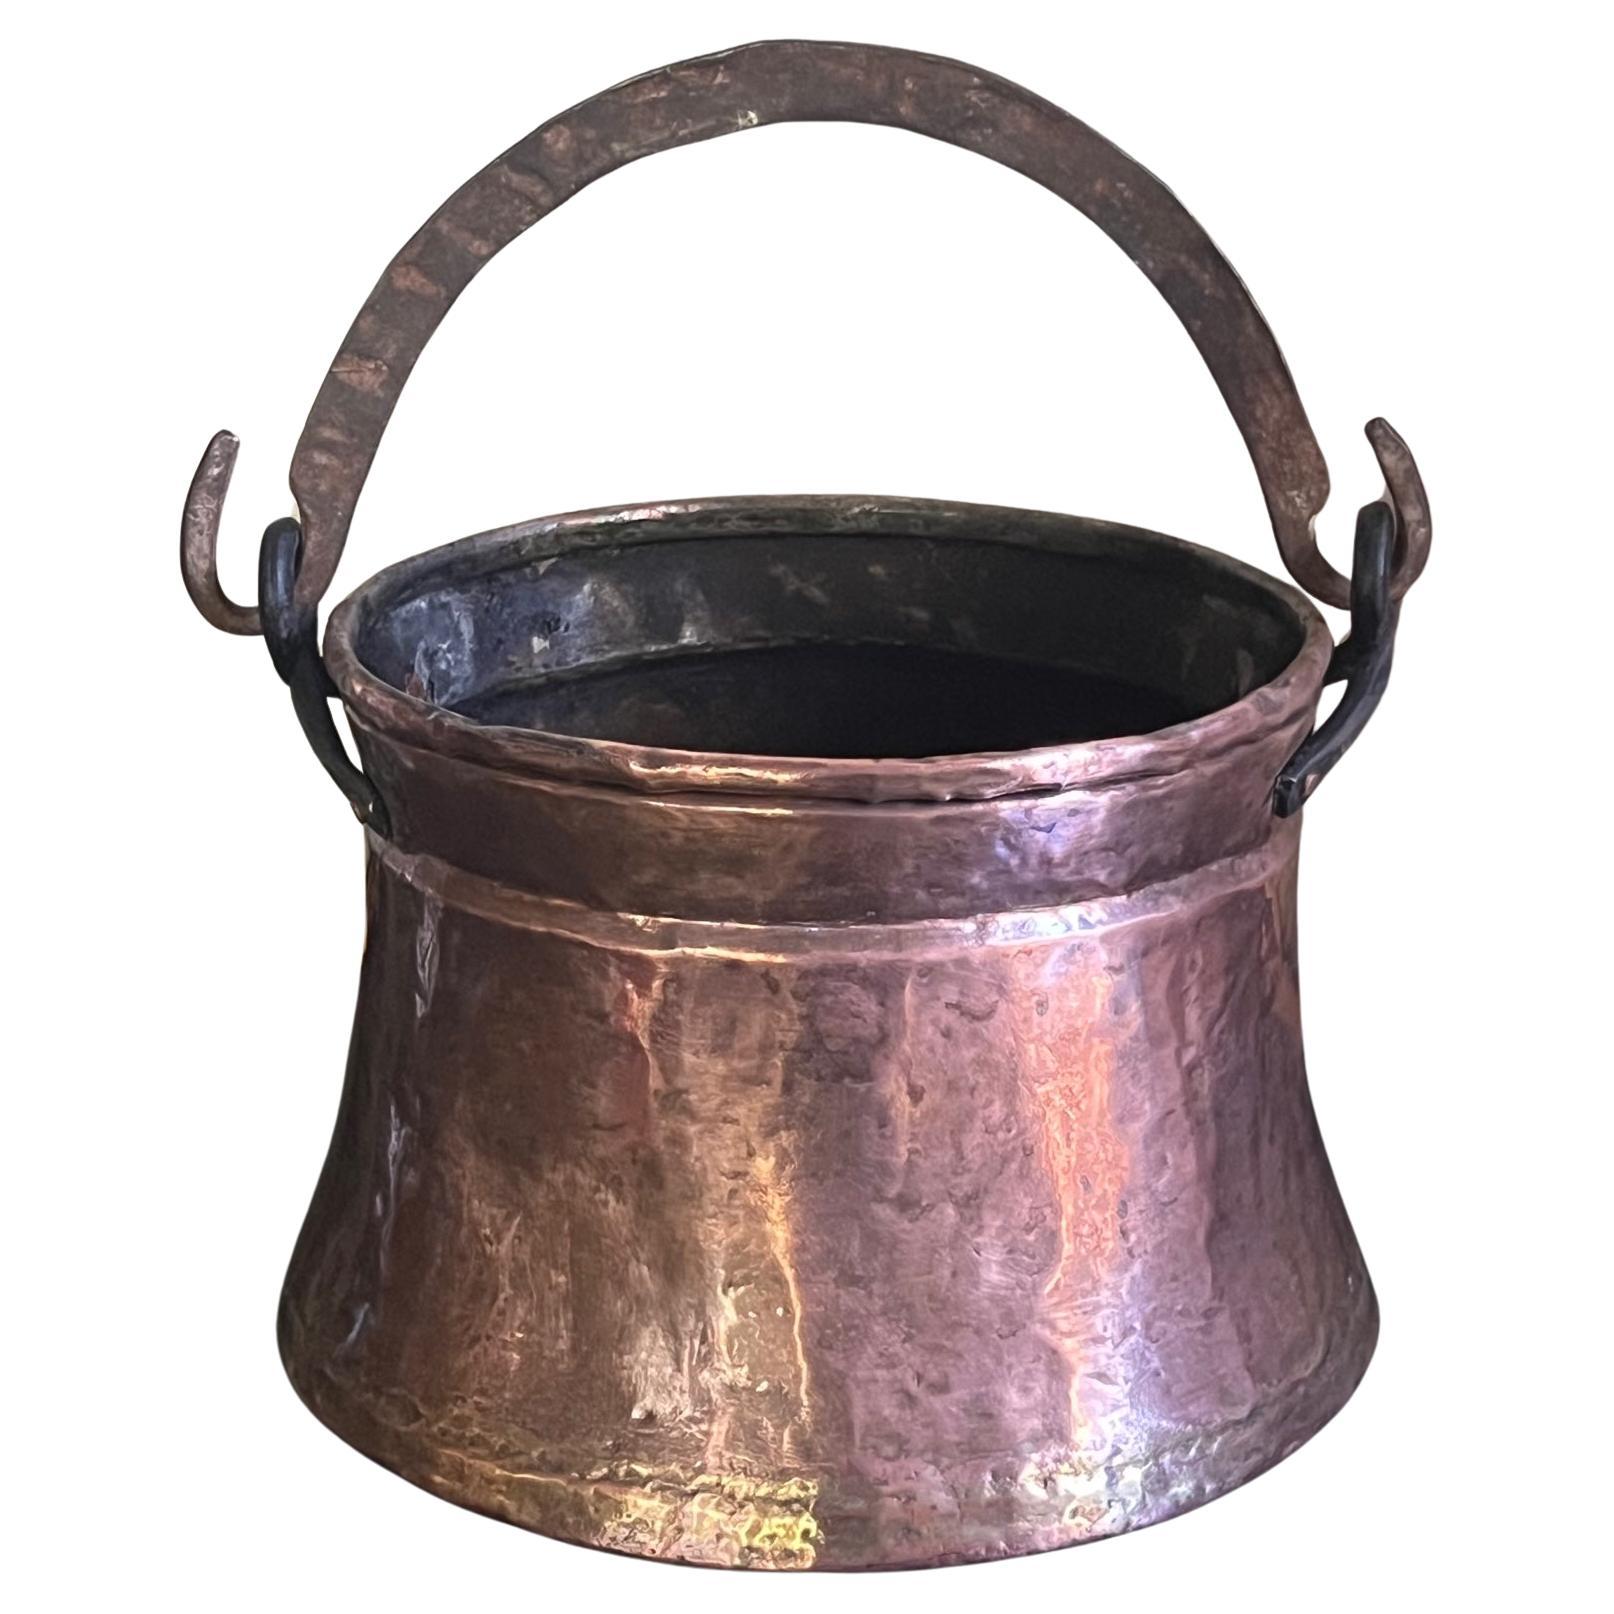 Antique Copper Hand Made Cauldron With Wrought Iron Handle For Sale